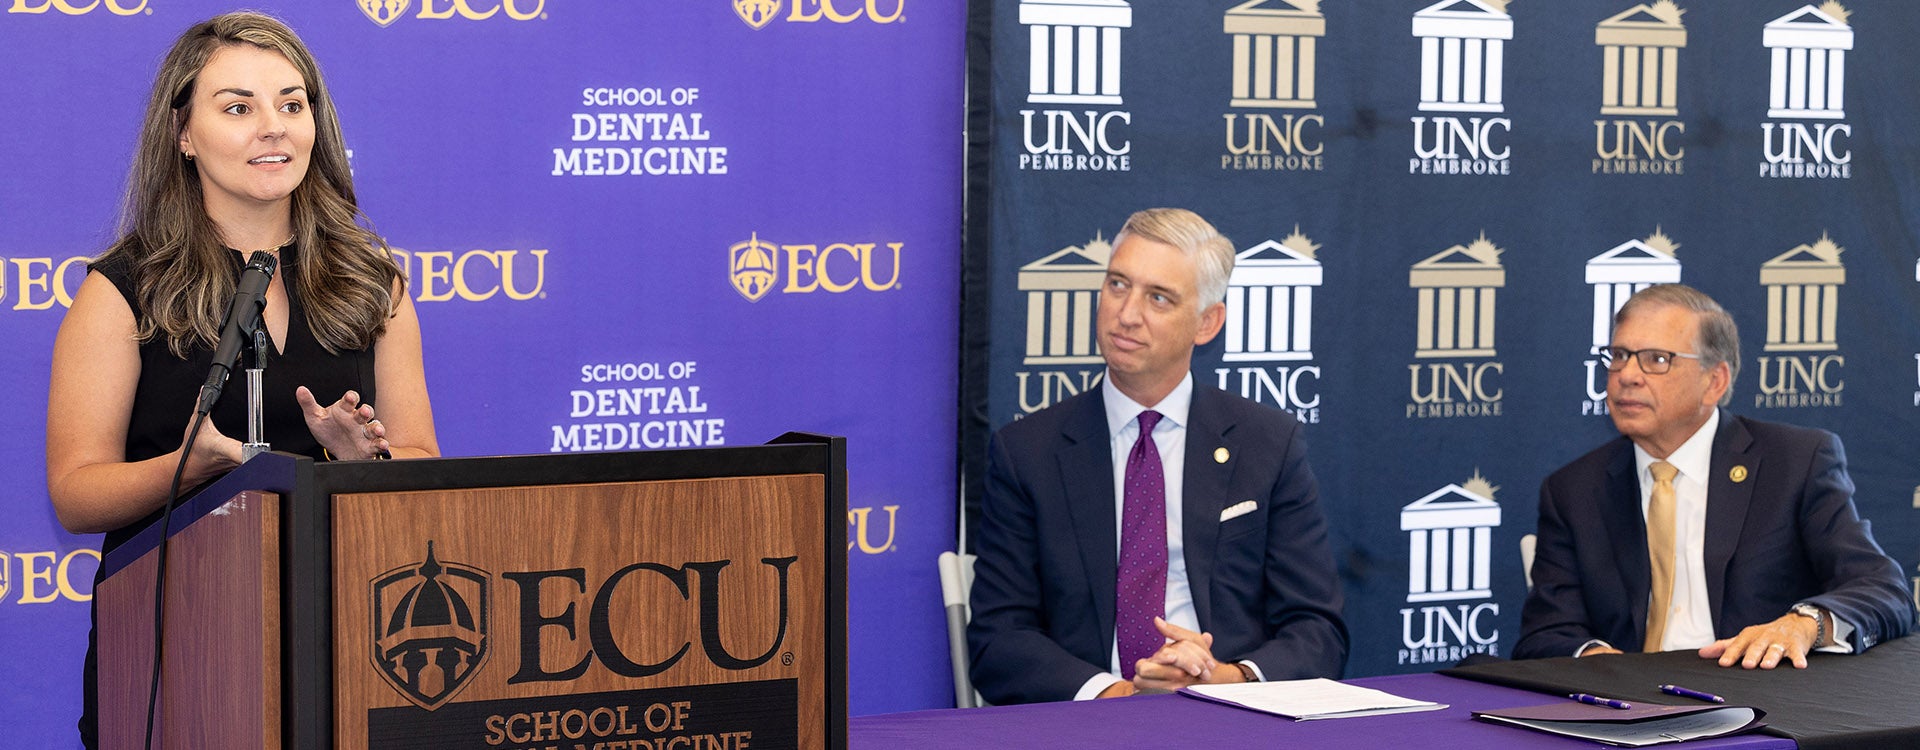 Dr. Kennedi Henry, an alumna of both the ECU School of Dental Medicine and the University of North Carolina at Pembroke, shares her story during the signing of an early assurance agreement between the two institutions.